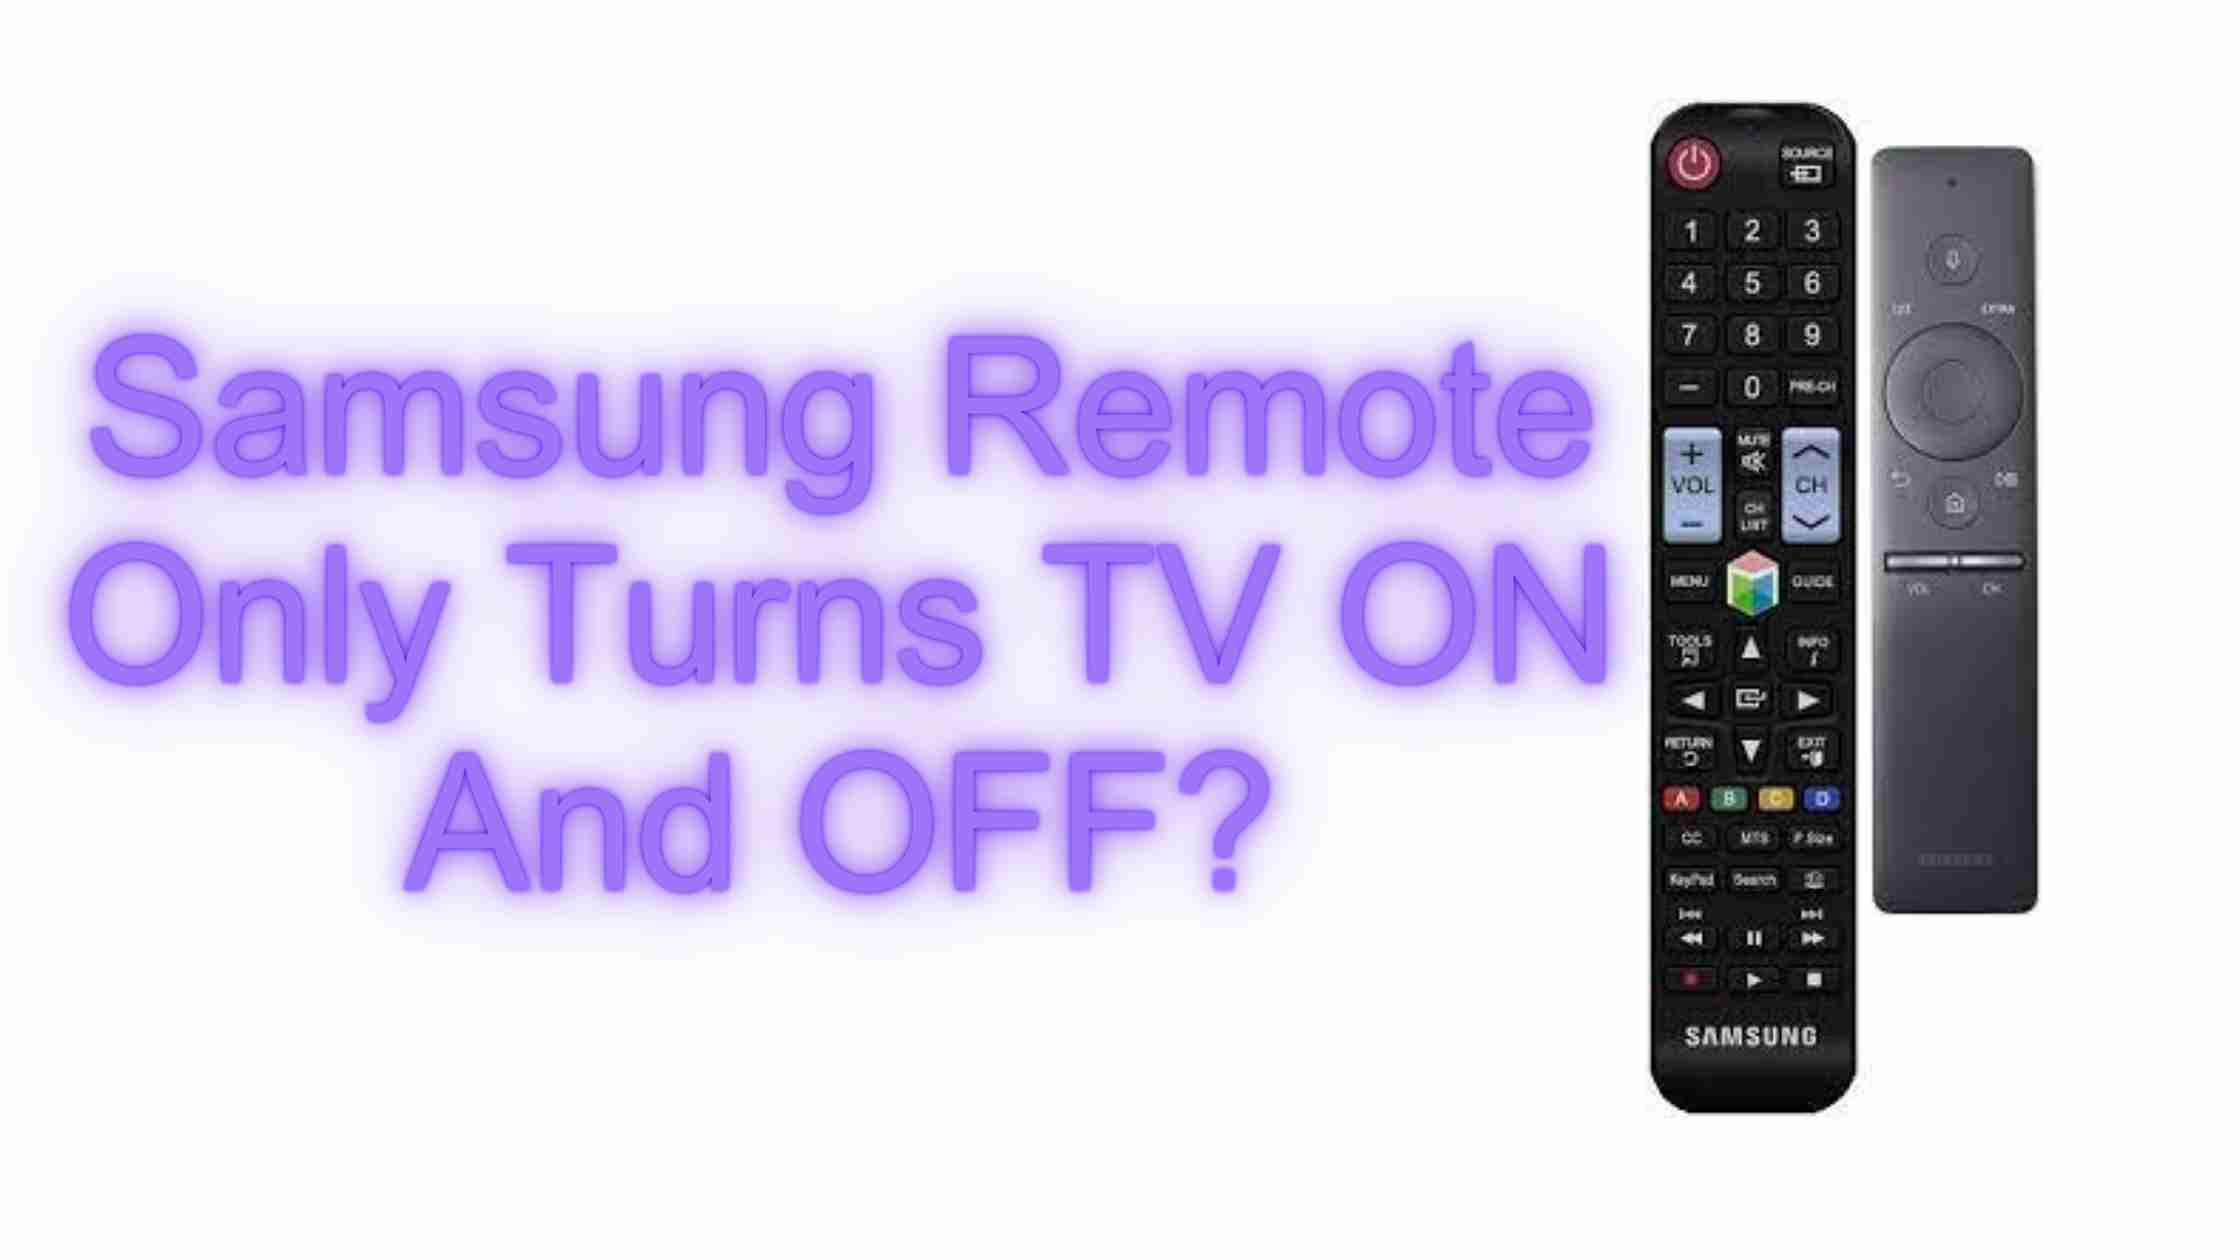 Samsung Remote Only Turns TV ON And OFF